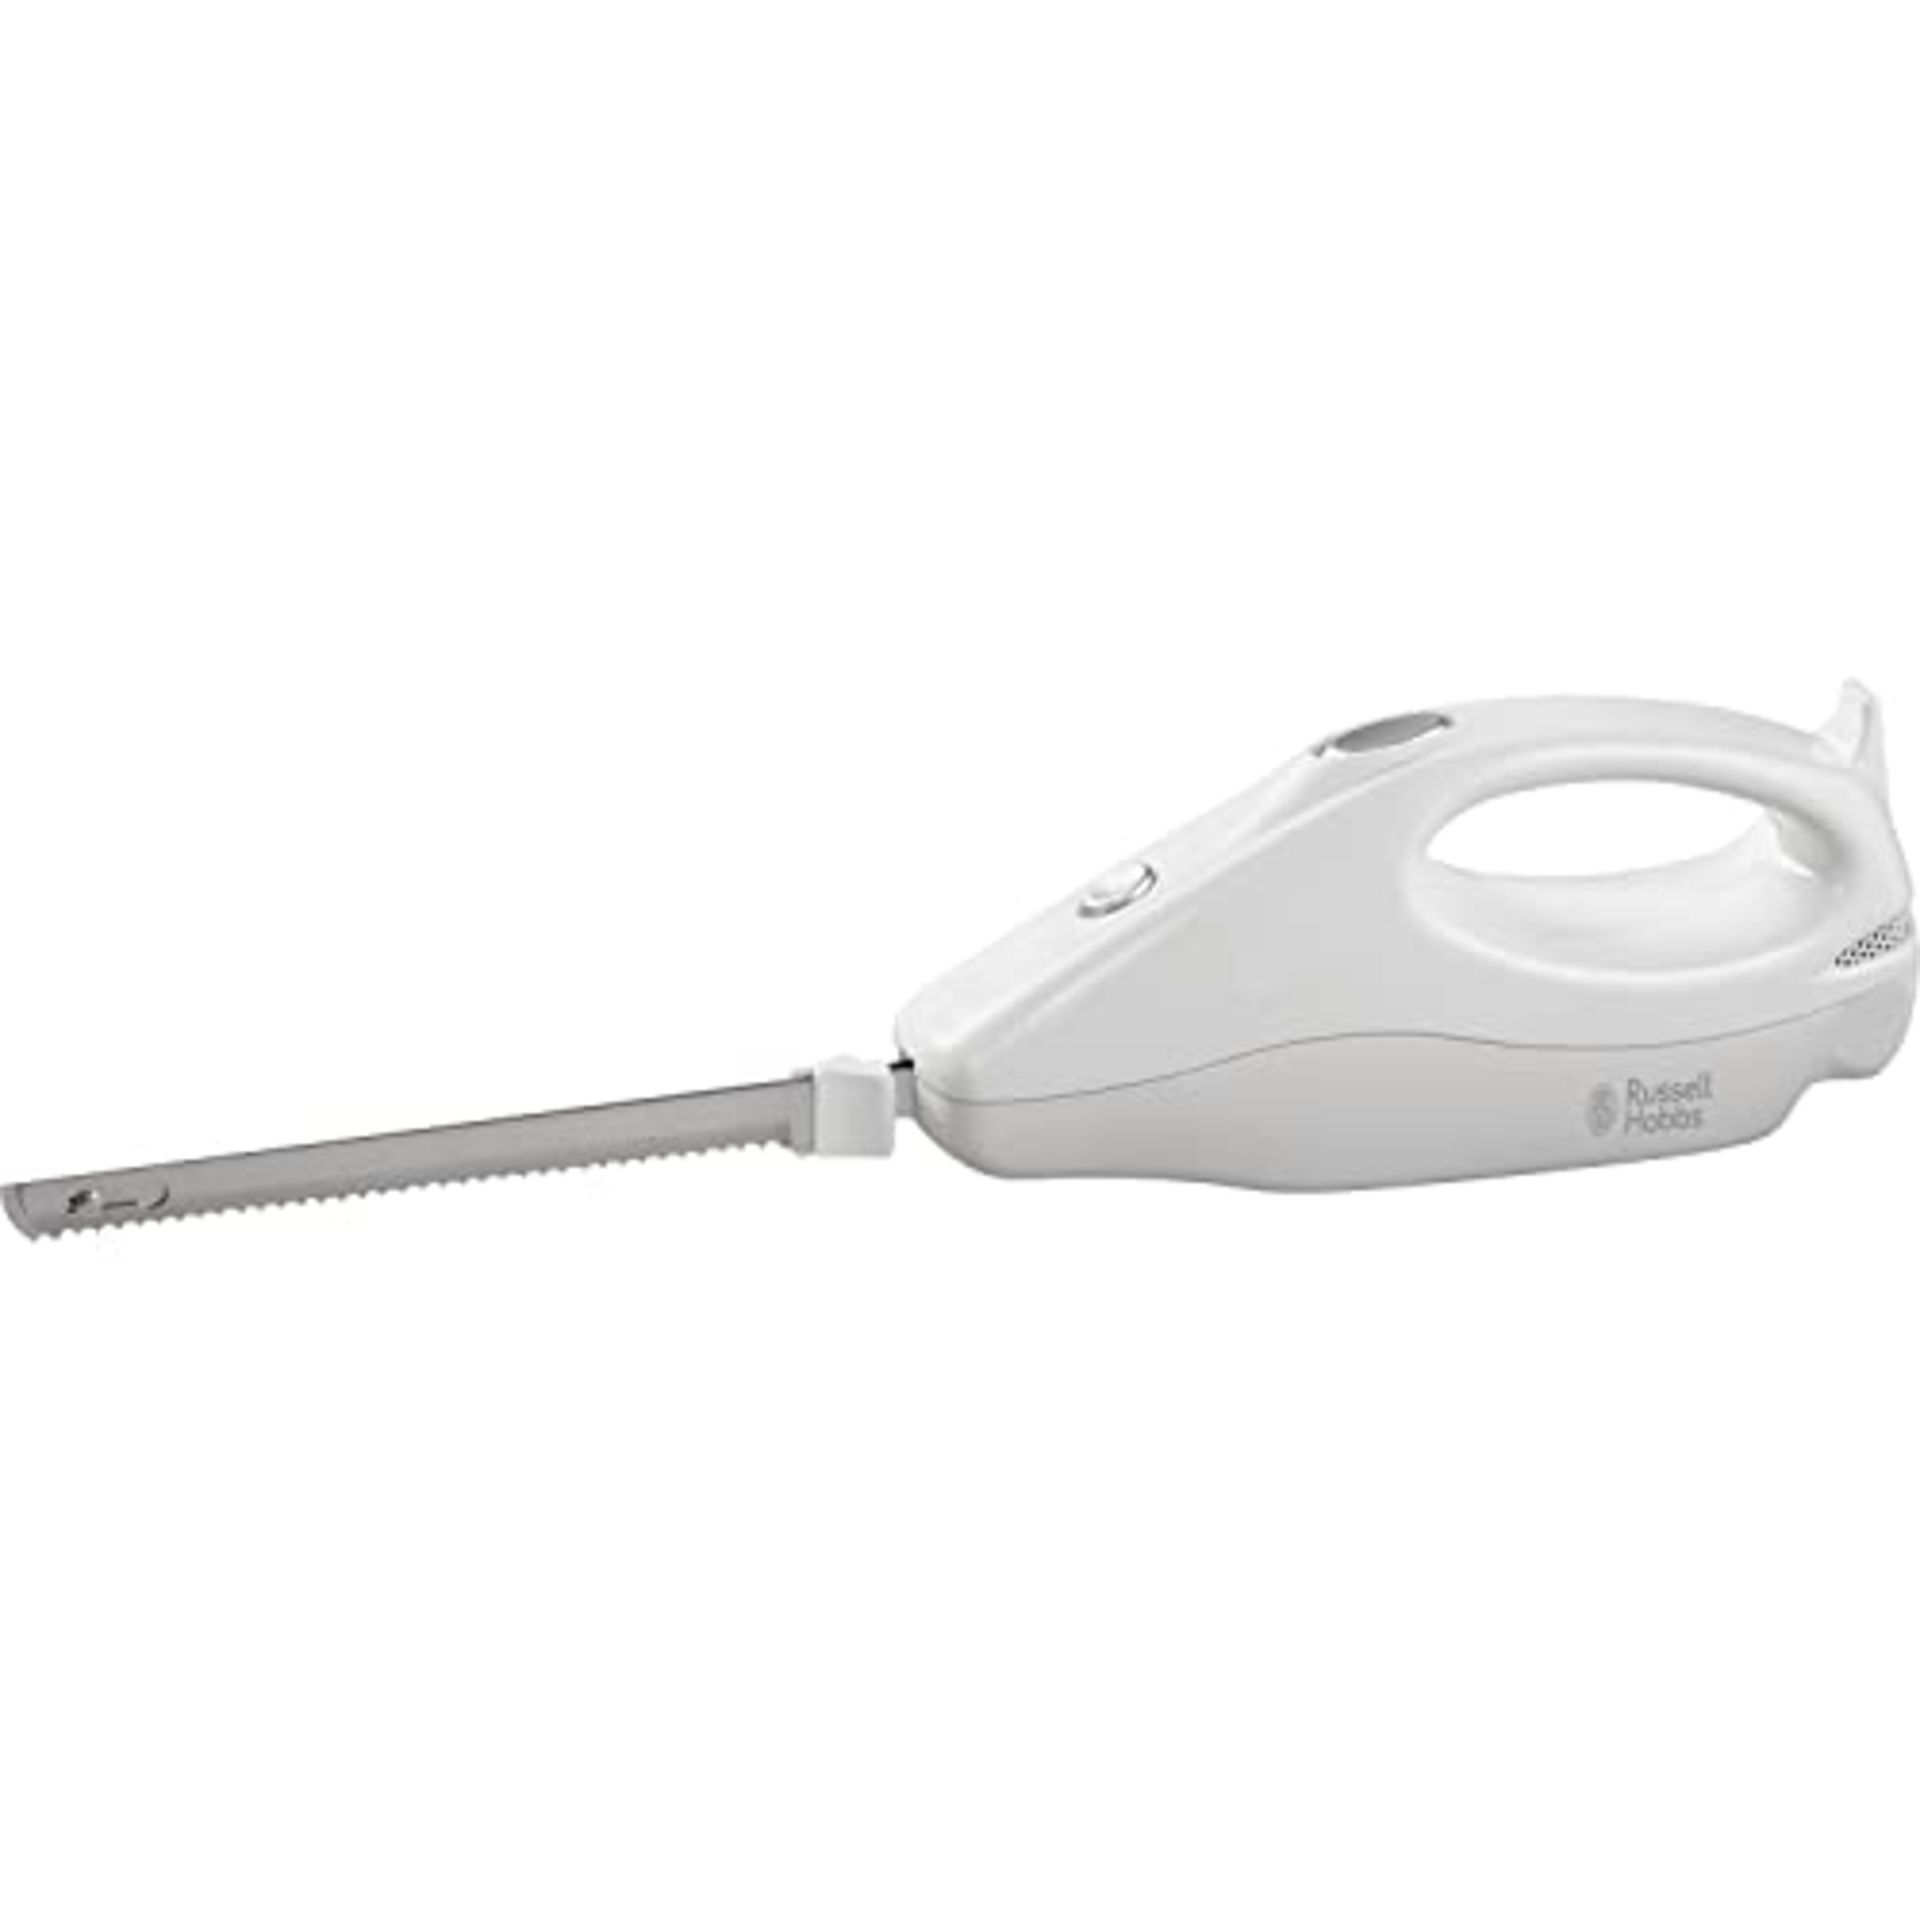 [INCOMPLETE] Russell Hobbs Electric Carving Knife 13892, White